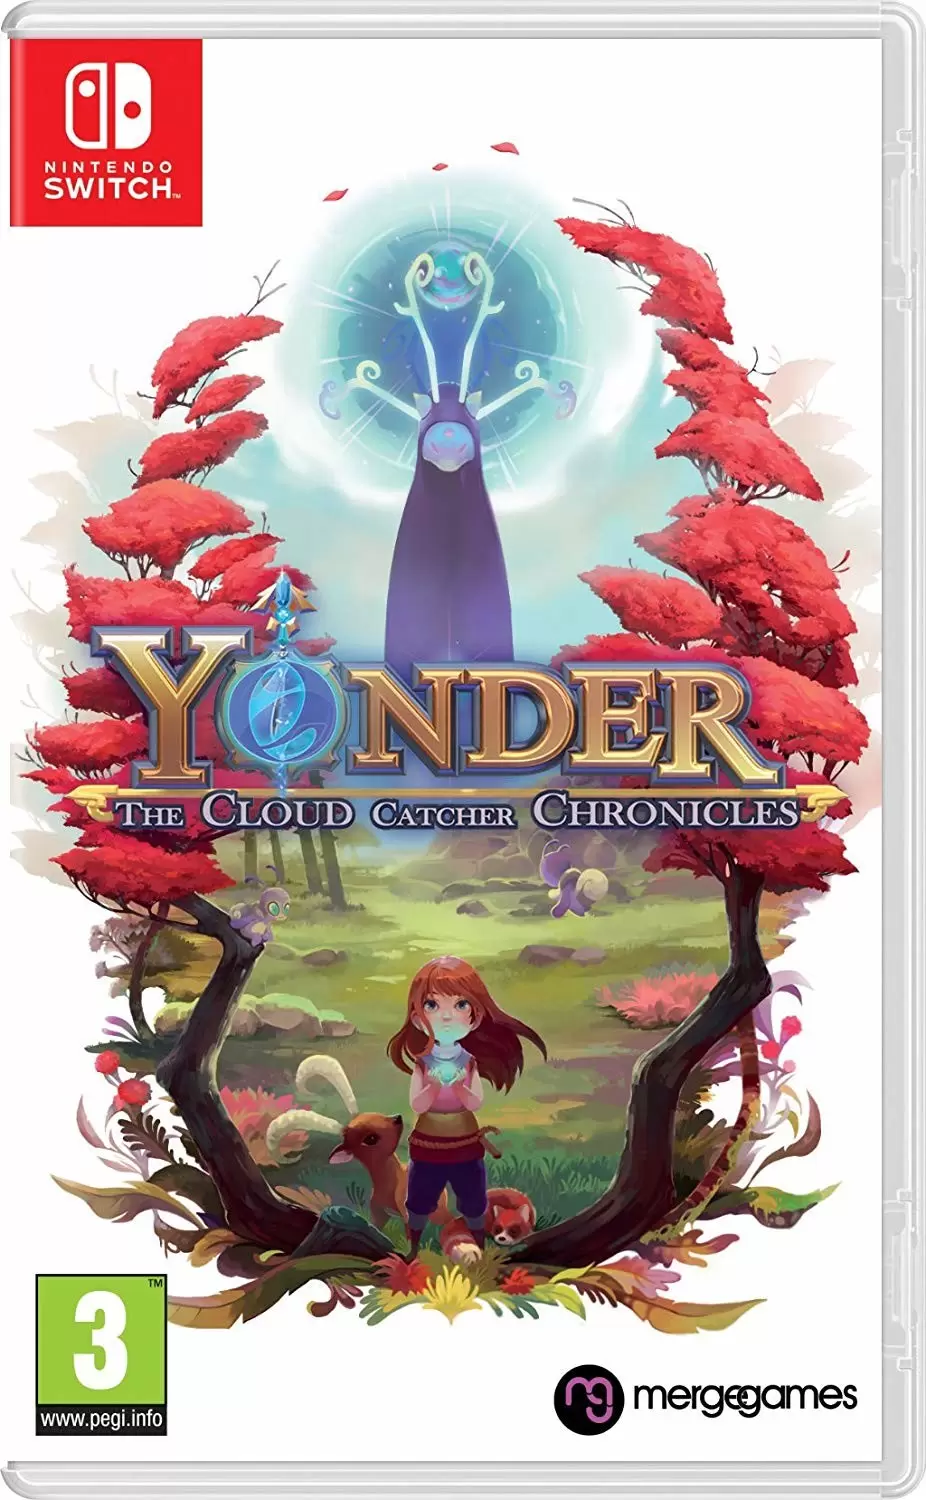 Nintendo Switch Games - Yonder The Cloud Catcher Chronicles